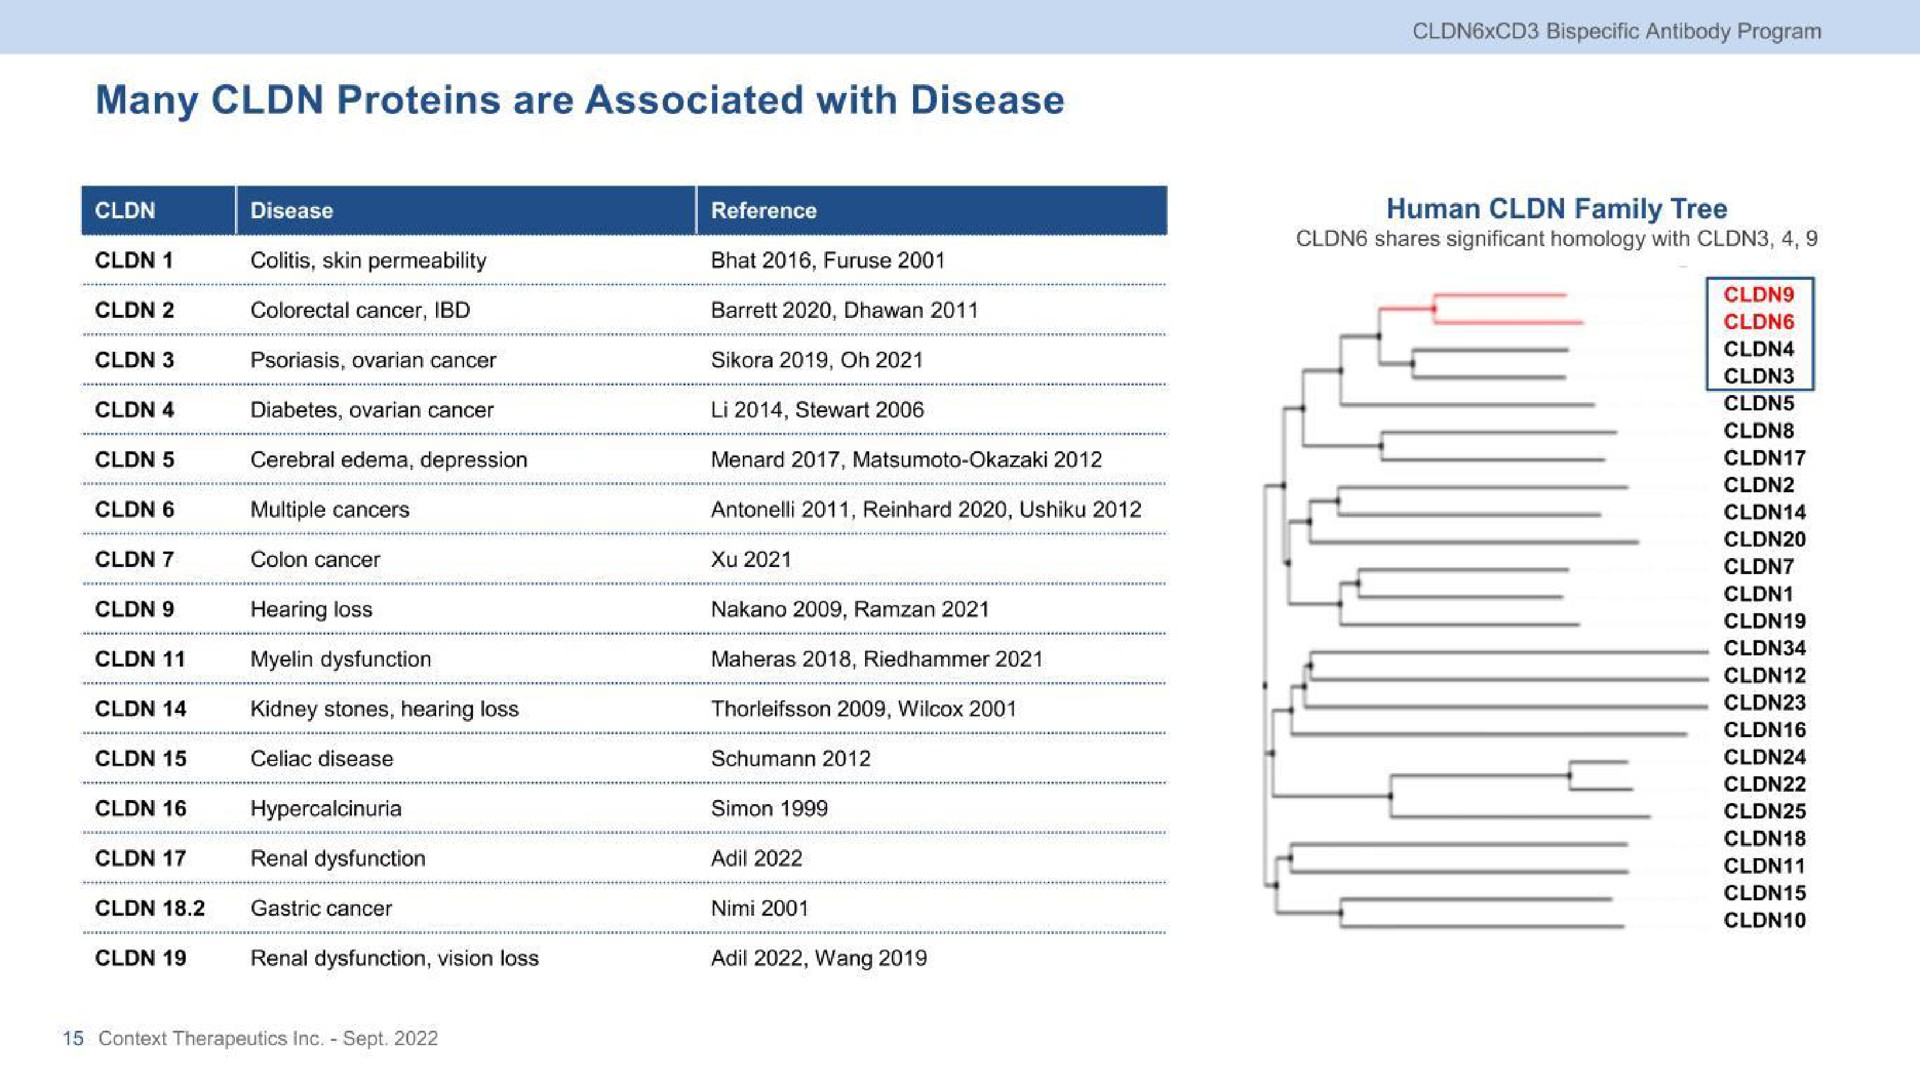 many proteins are associated with disease | Context Therapeutics